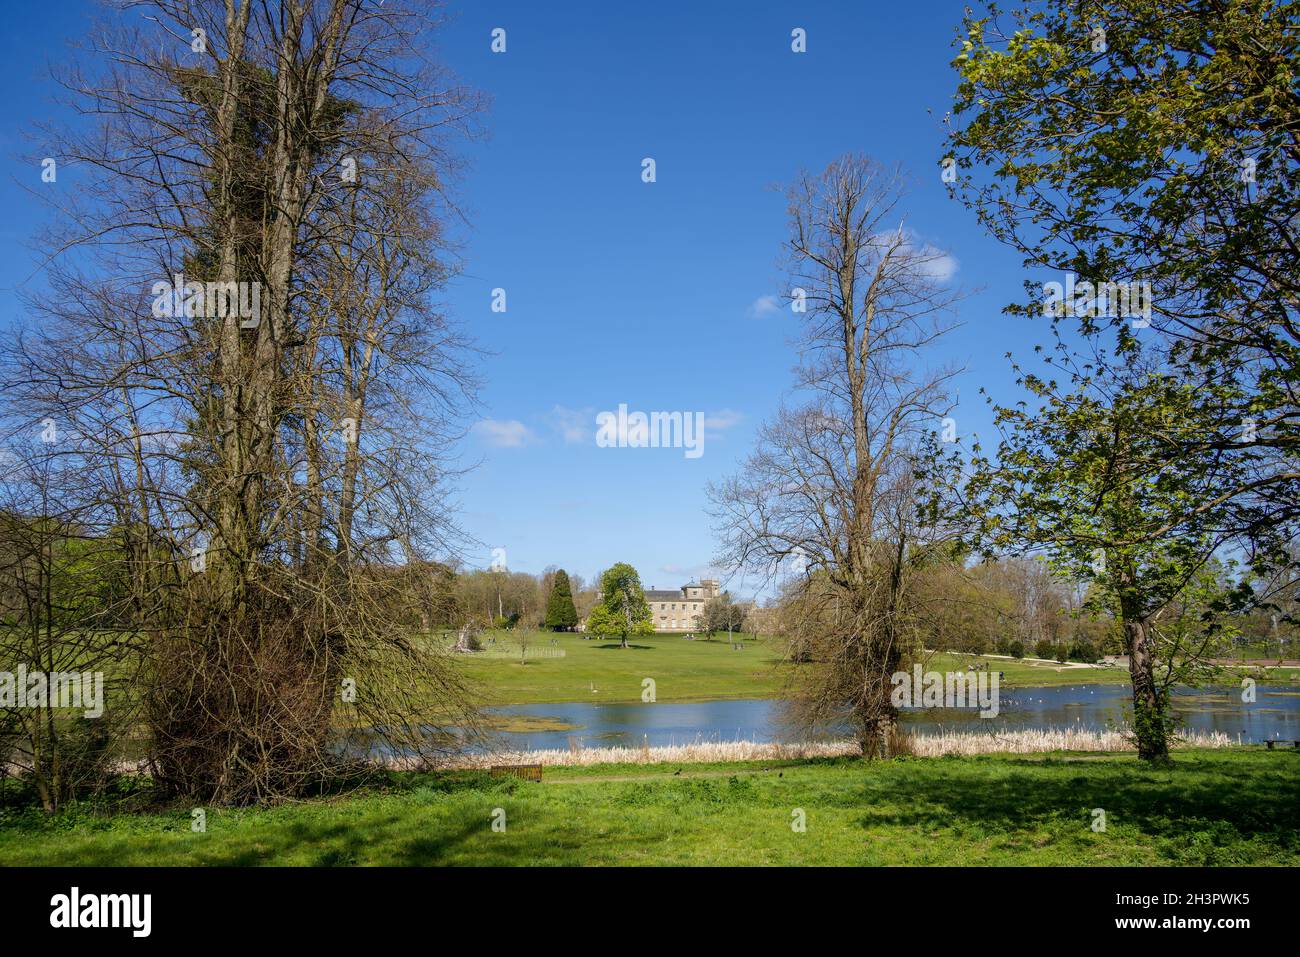 SWINDON, WILTSHIRE, UK -APRIL 25 : View of Lydiard Park showing a distant view of the Palladian house near Swindon Wiltshire on Stock Photo